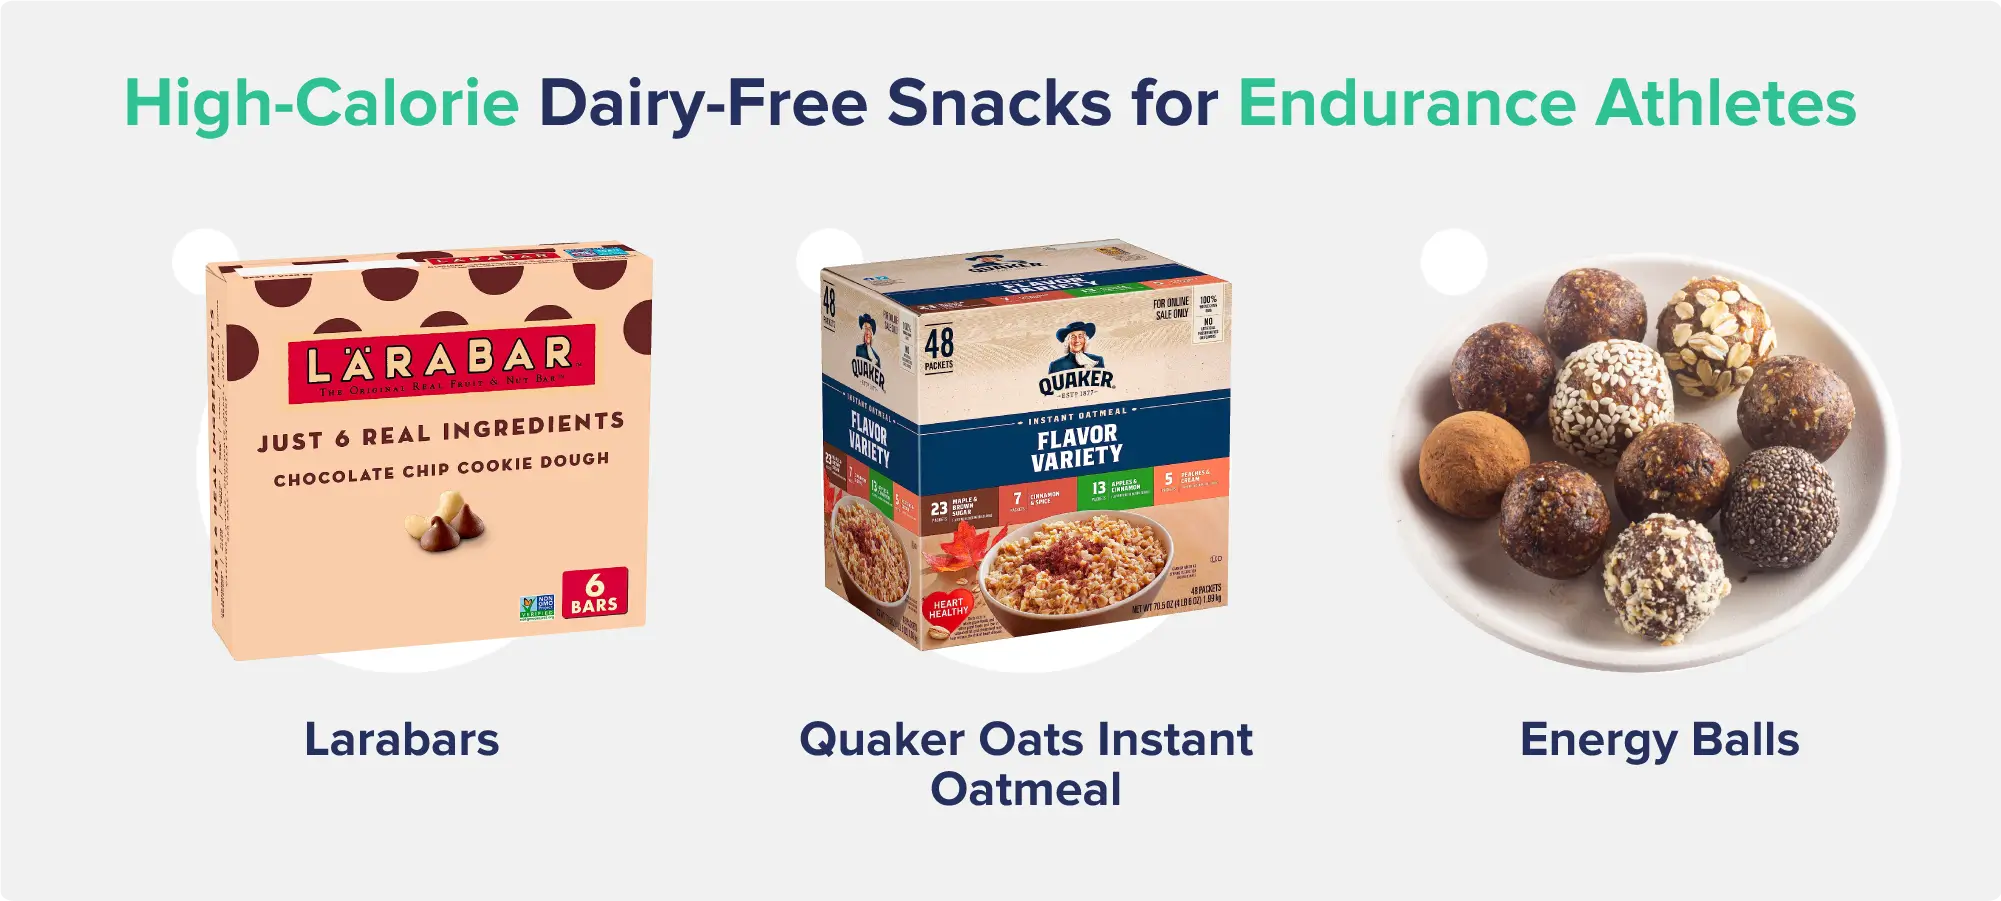 A graphic entitled "High-Calorie Dairy-Free Snacks for Endurance Athletes" depicting labeled images of a box of Chocolate Chip Larabars, a box of Quaker Instant Oatmeal, and a plate of energy balls.